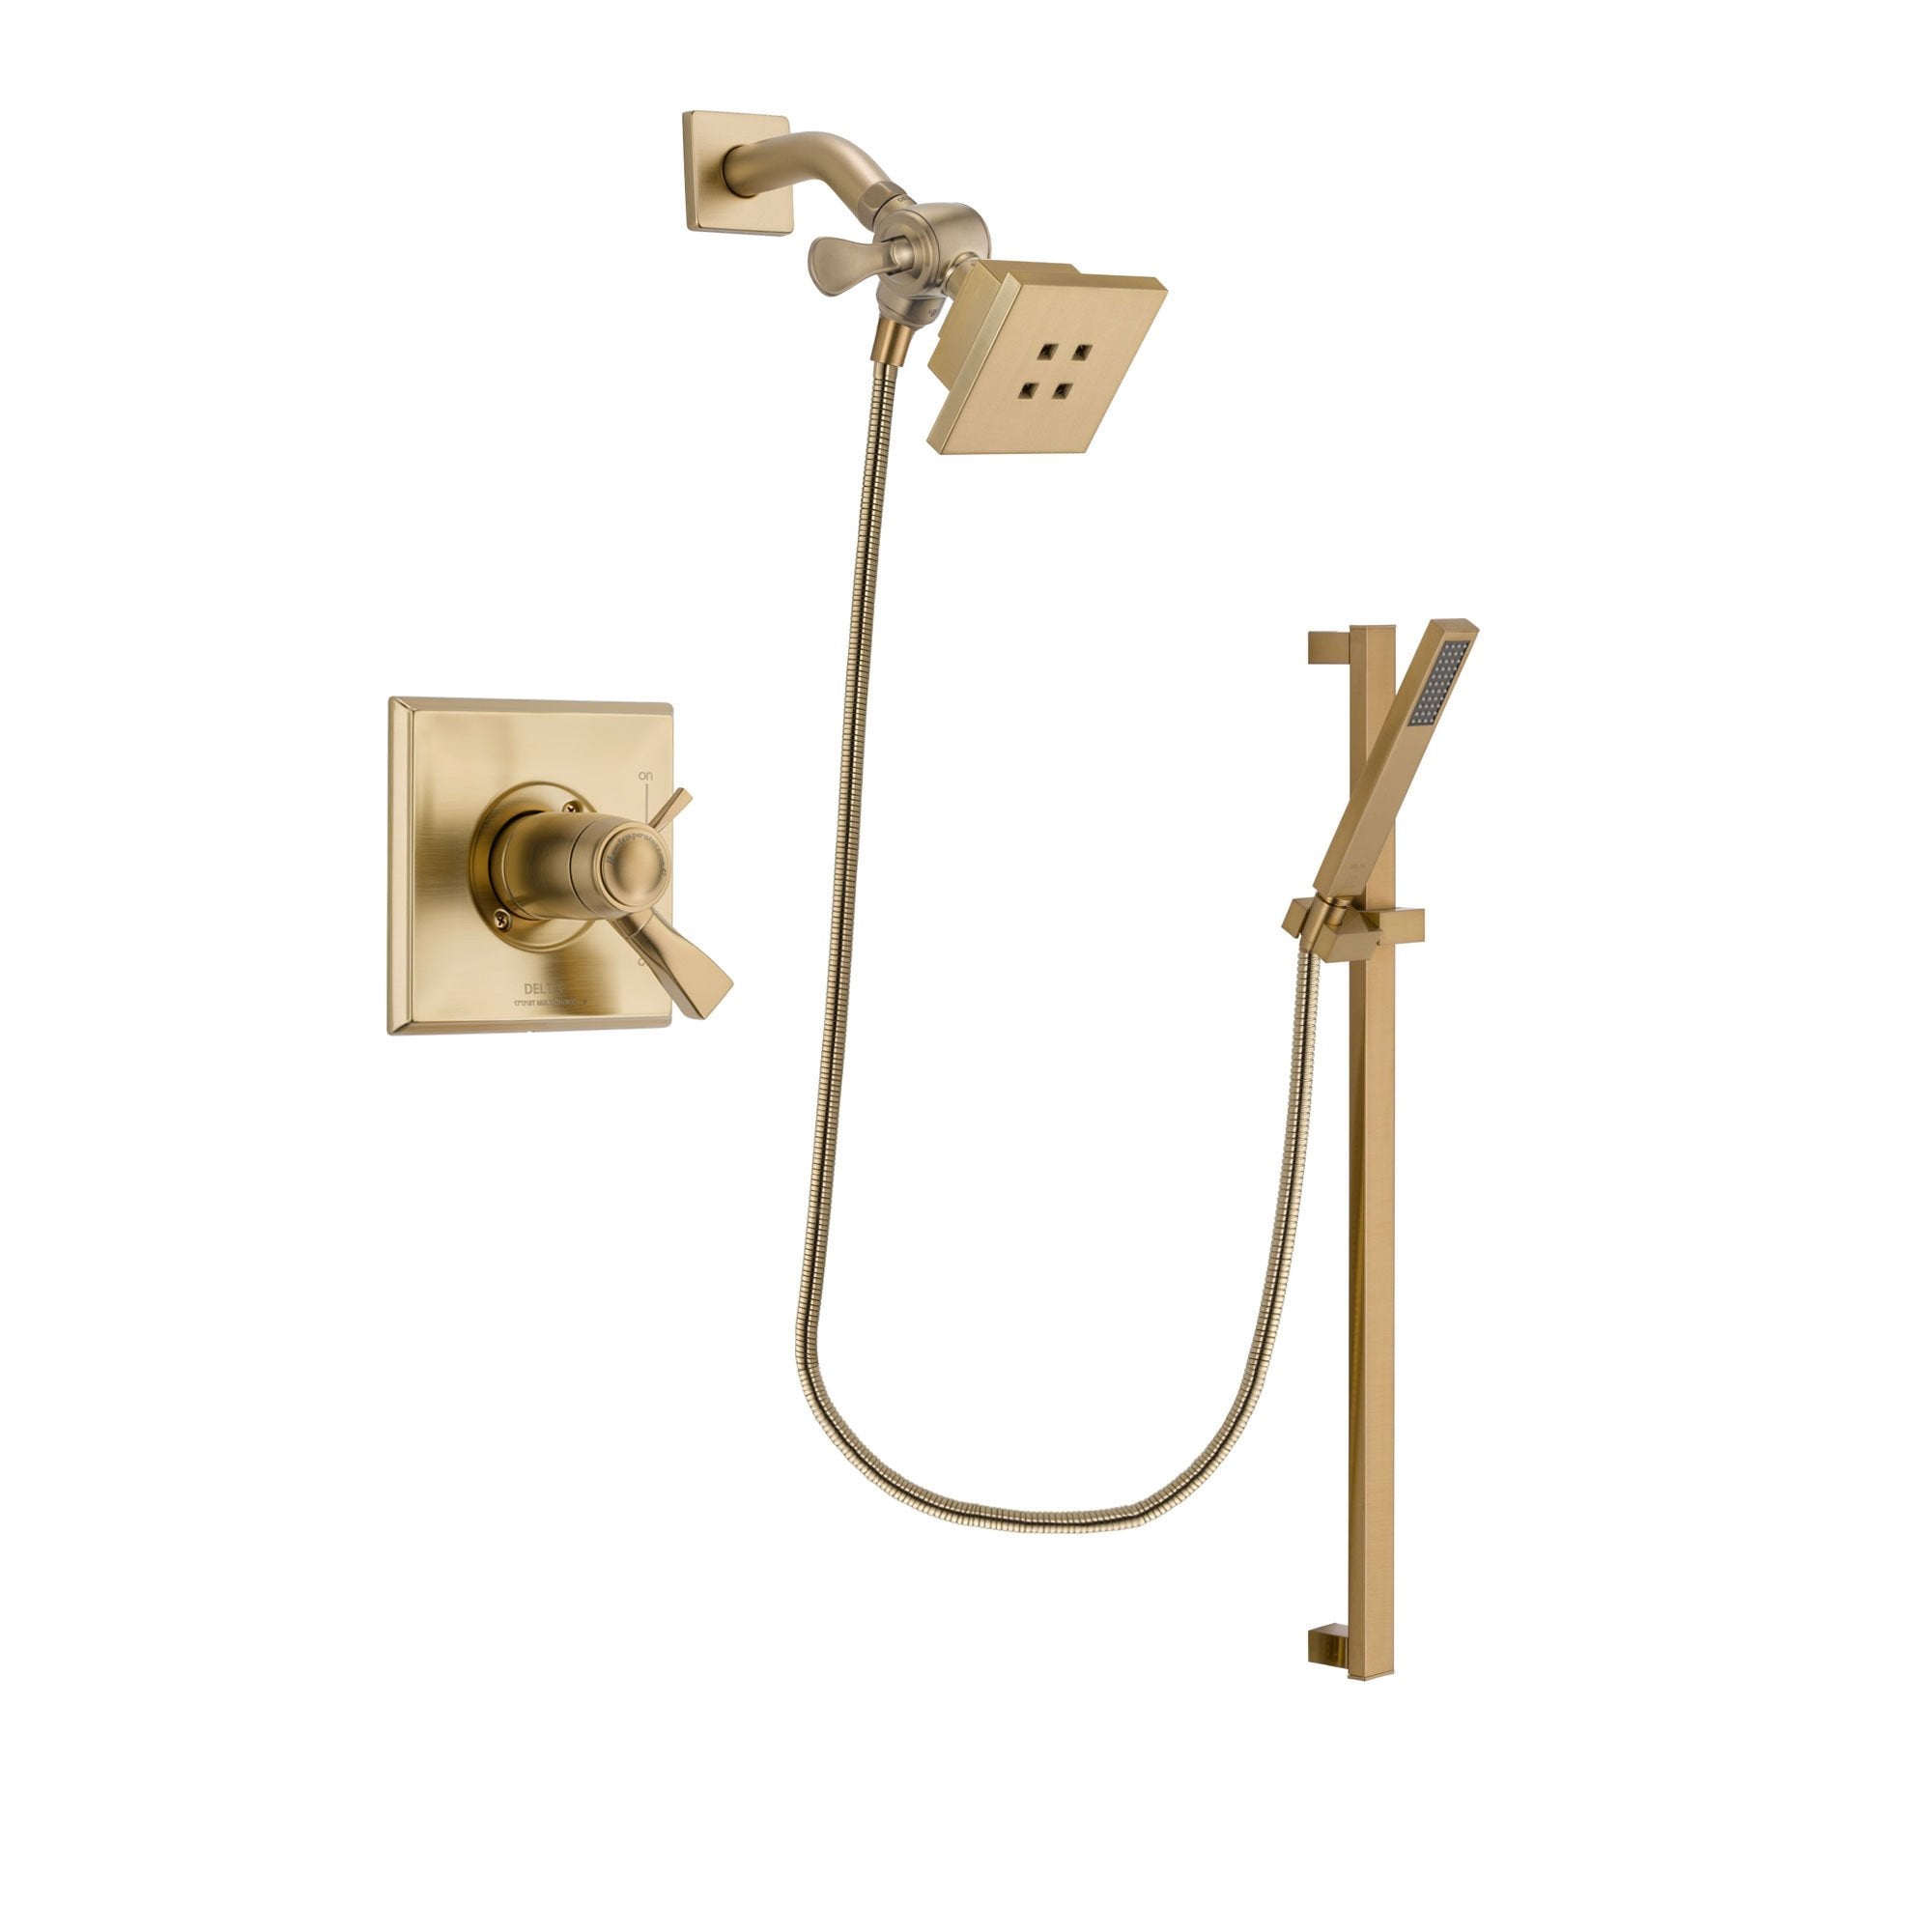 Delta Dryden Champagne Bronze Finish Thermostatic Shower Faucet System Package with Square Showerhead and Modern Handheld Shower with Square Slide Bar Includes Rough-in Valve DSP3982V